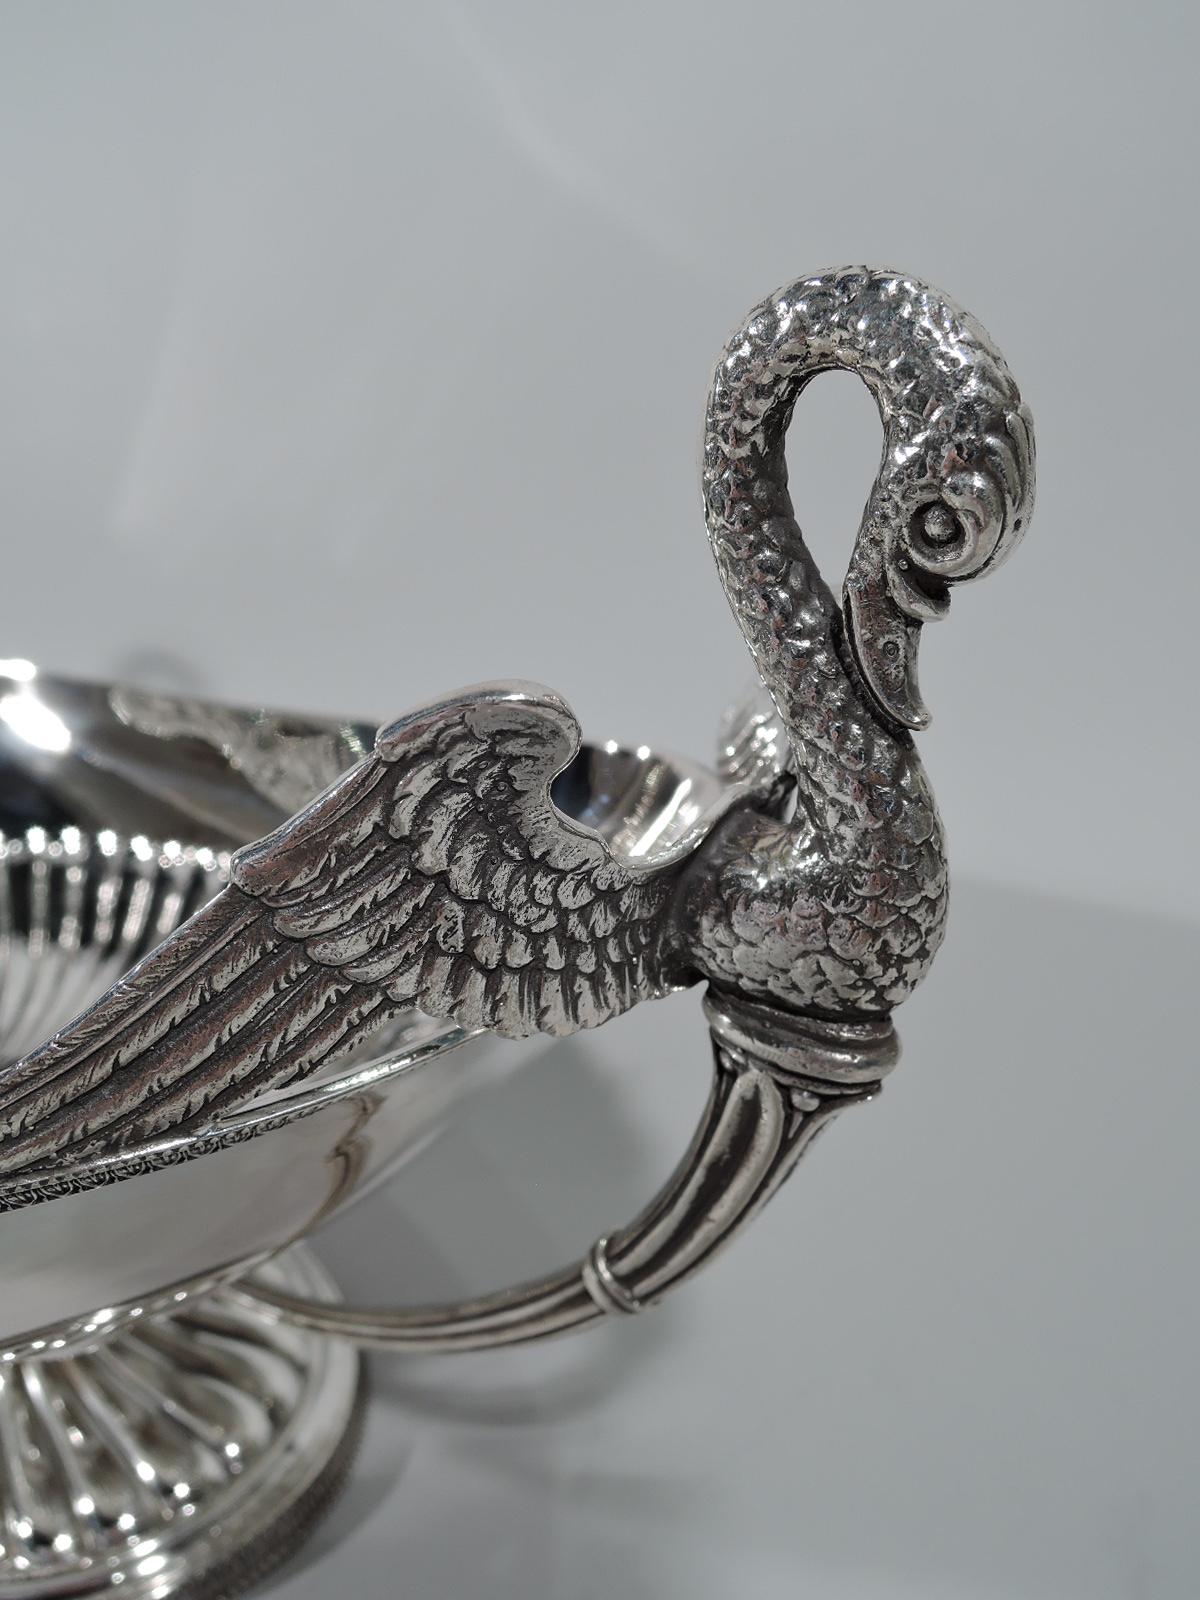 Classical Empire silver centerpiece bowl. Boat form with half gadrooning and tapering and reeded end handles with cast swan finials. Gadrooned and raised oval foot. Rims beaded with leaf-and-dart ornament. Italian hallmark (1944-68) for Ricci & C.